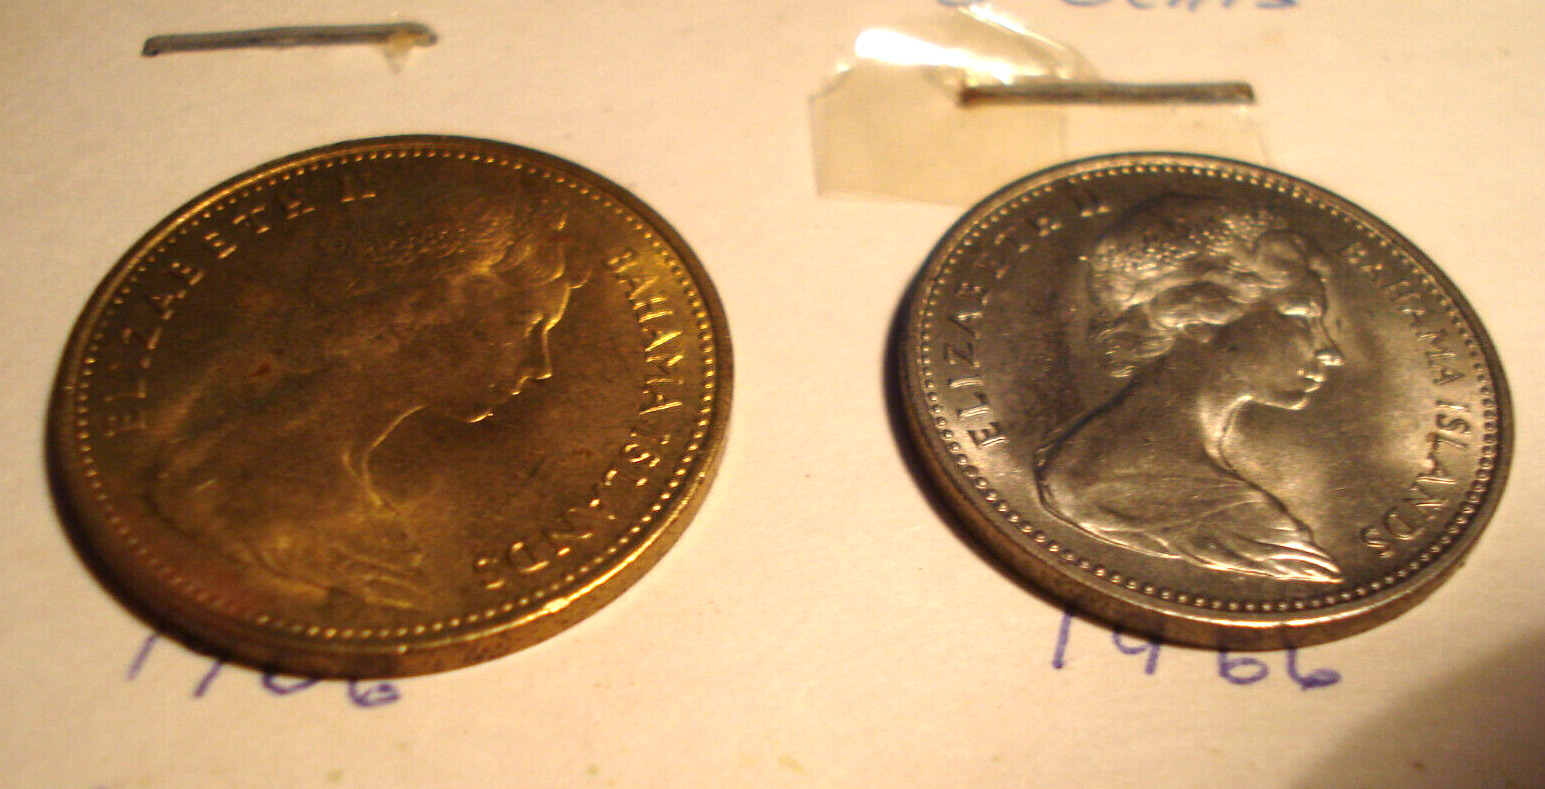 (2) 1966 Bahamas 1 Km2 And 5 Km3 Cent Coins  Queen Elizabeth 11 2nd